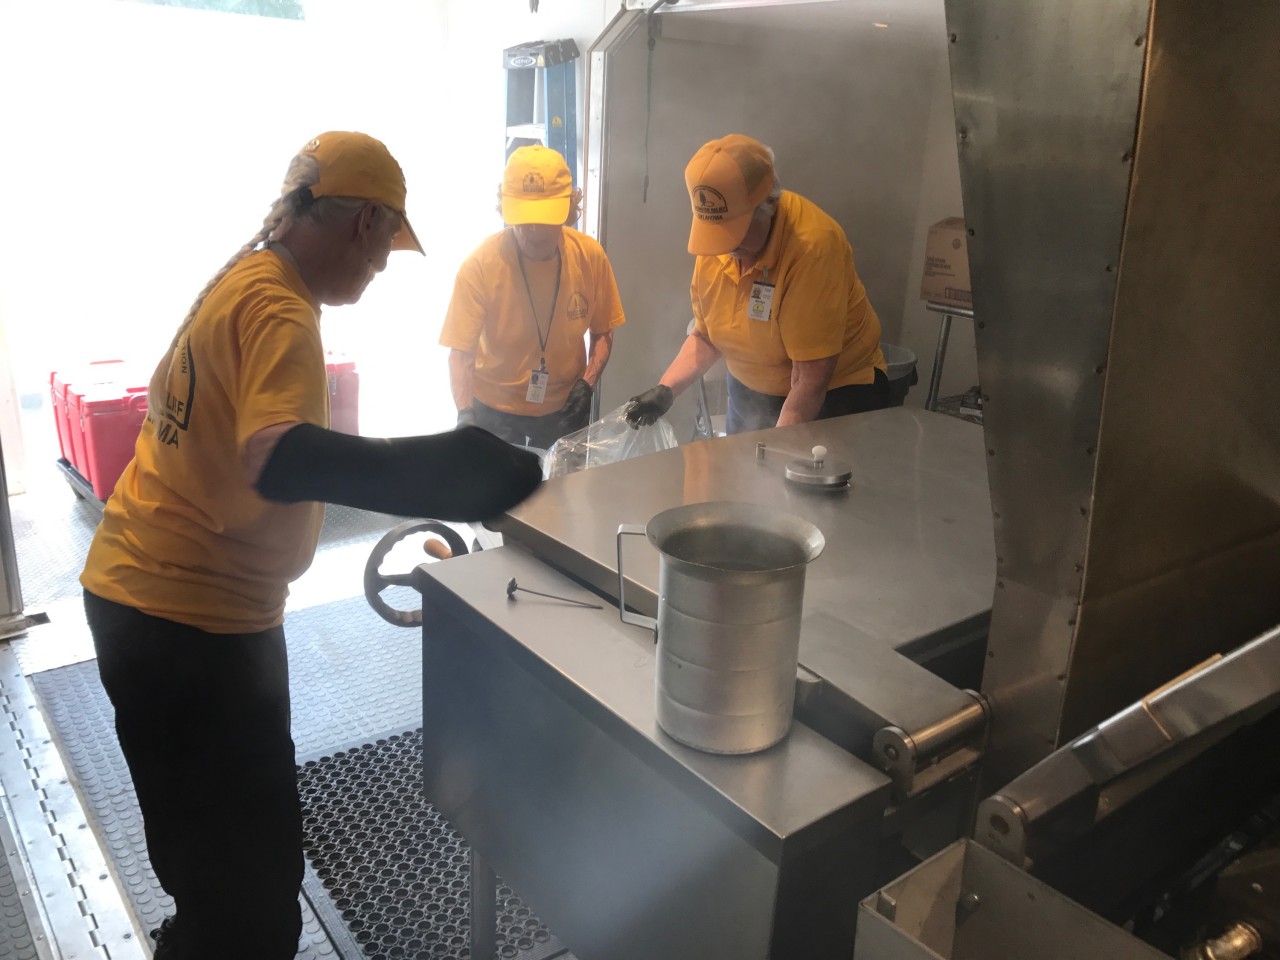 Oklahoma Baptists provide 10,000 meals in first days of preparing meals in Houston